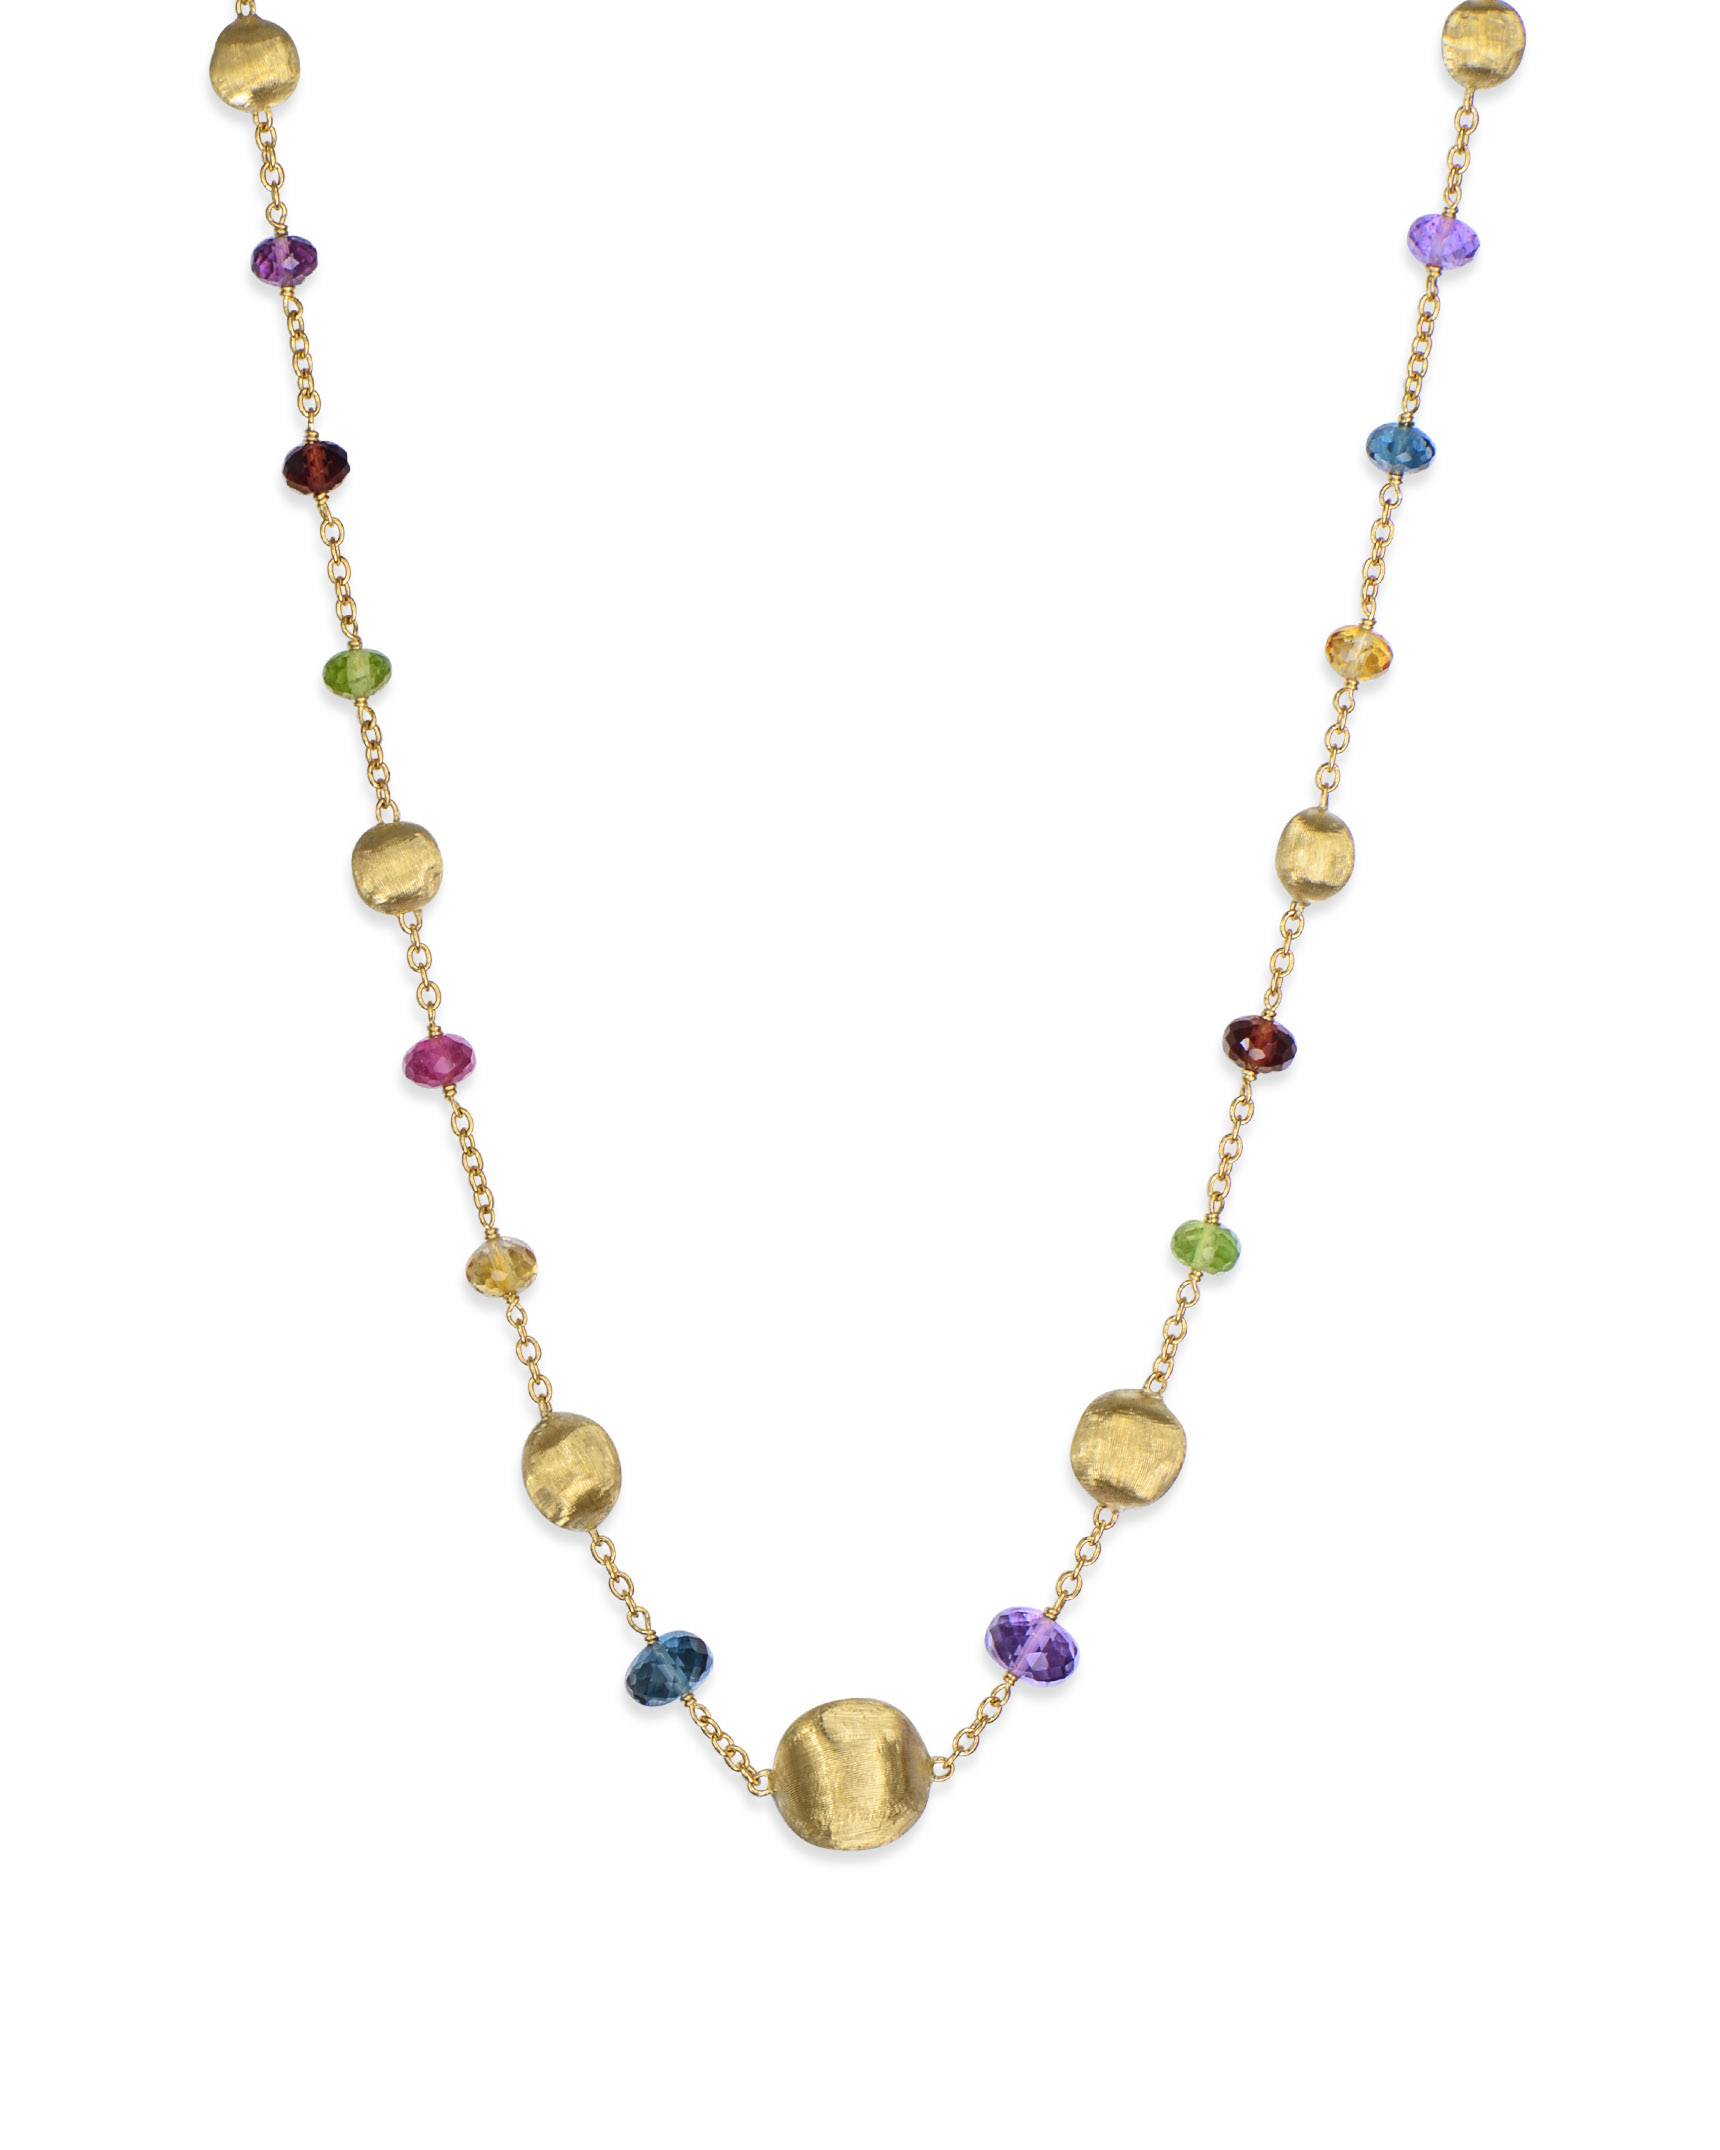 Mixed Stone Africa Bead Necklace by Marco Bicego - Turgeon Raine